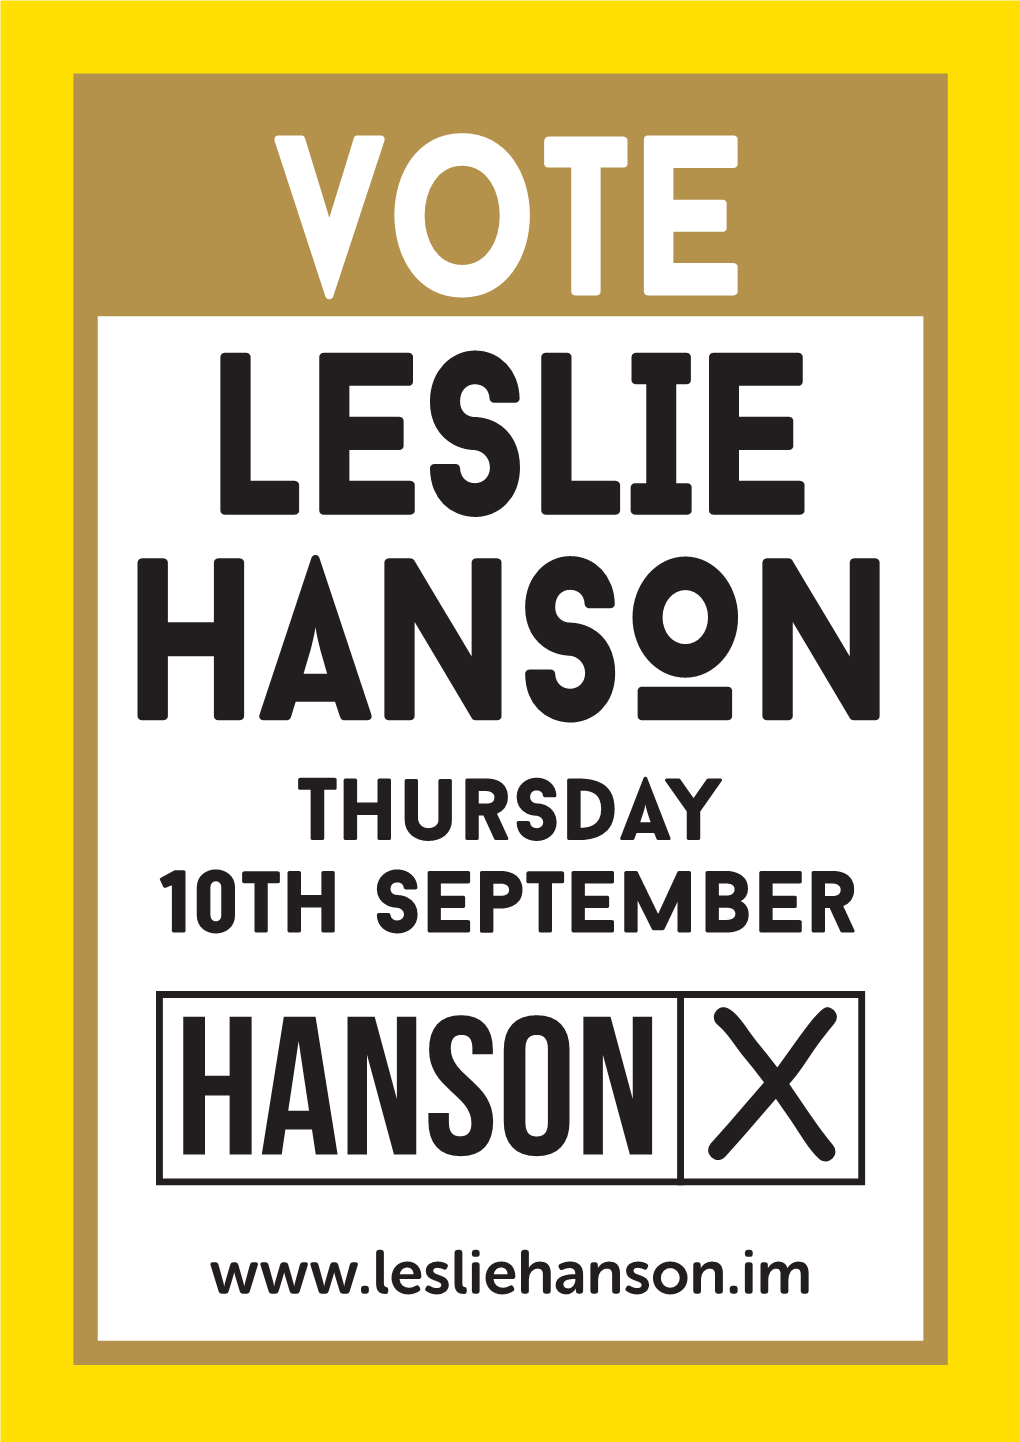 Thursday 10Th September HANSON X This Year I Was Elected the President of the World Manx Association